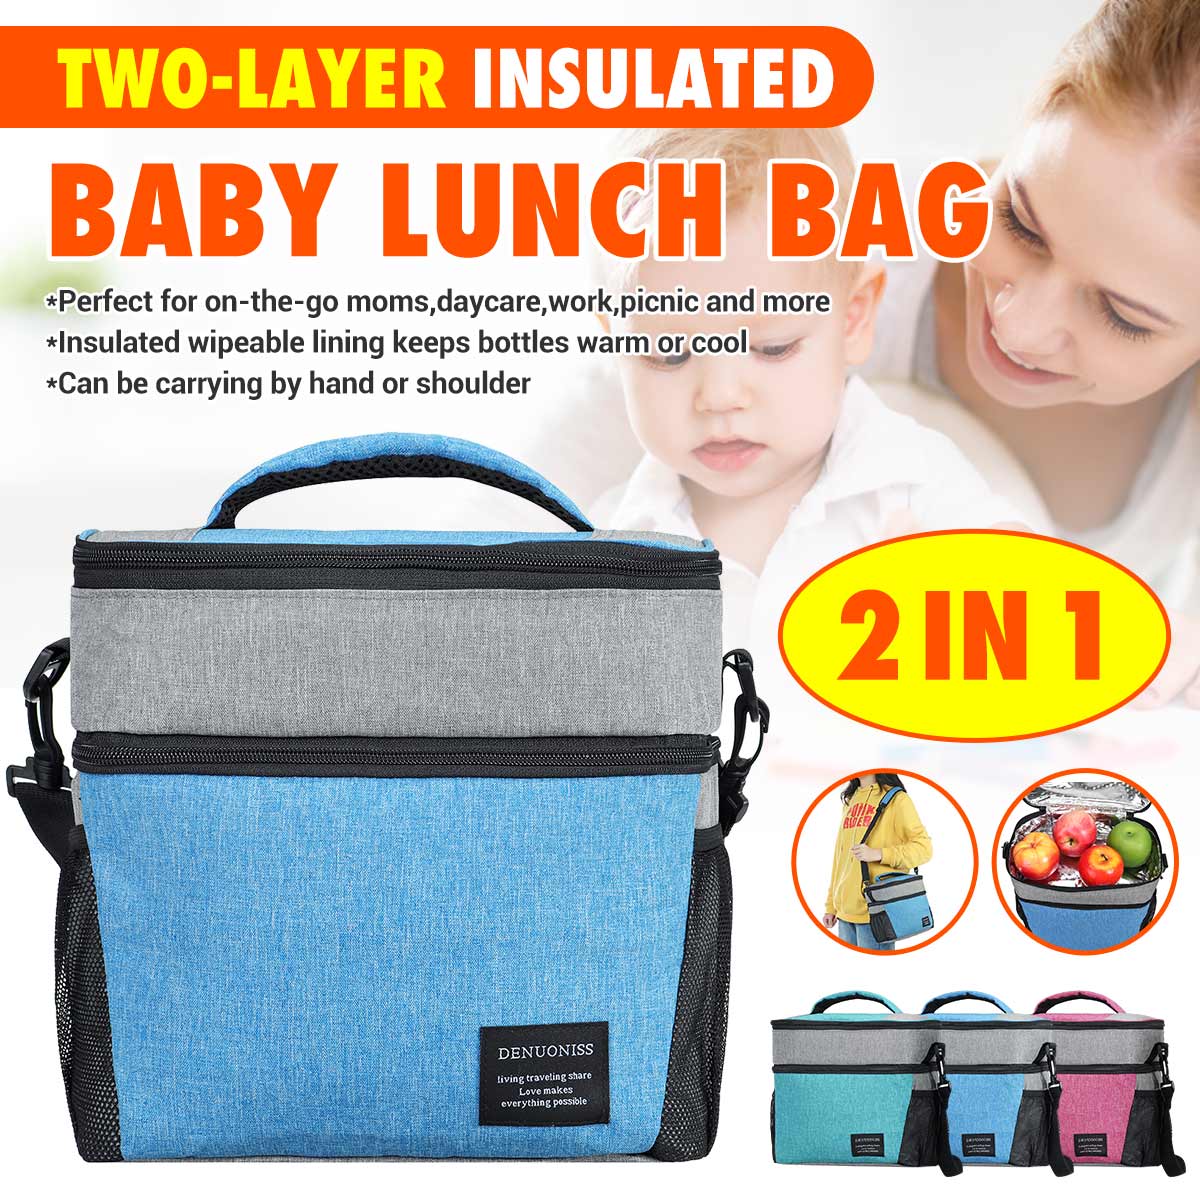 Leakproof-Two-Layer-Insulated-Lunch-Bag-Picnic-Food-Storage-Bags-1863629-1